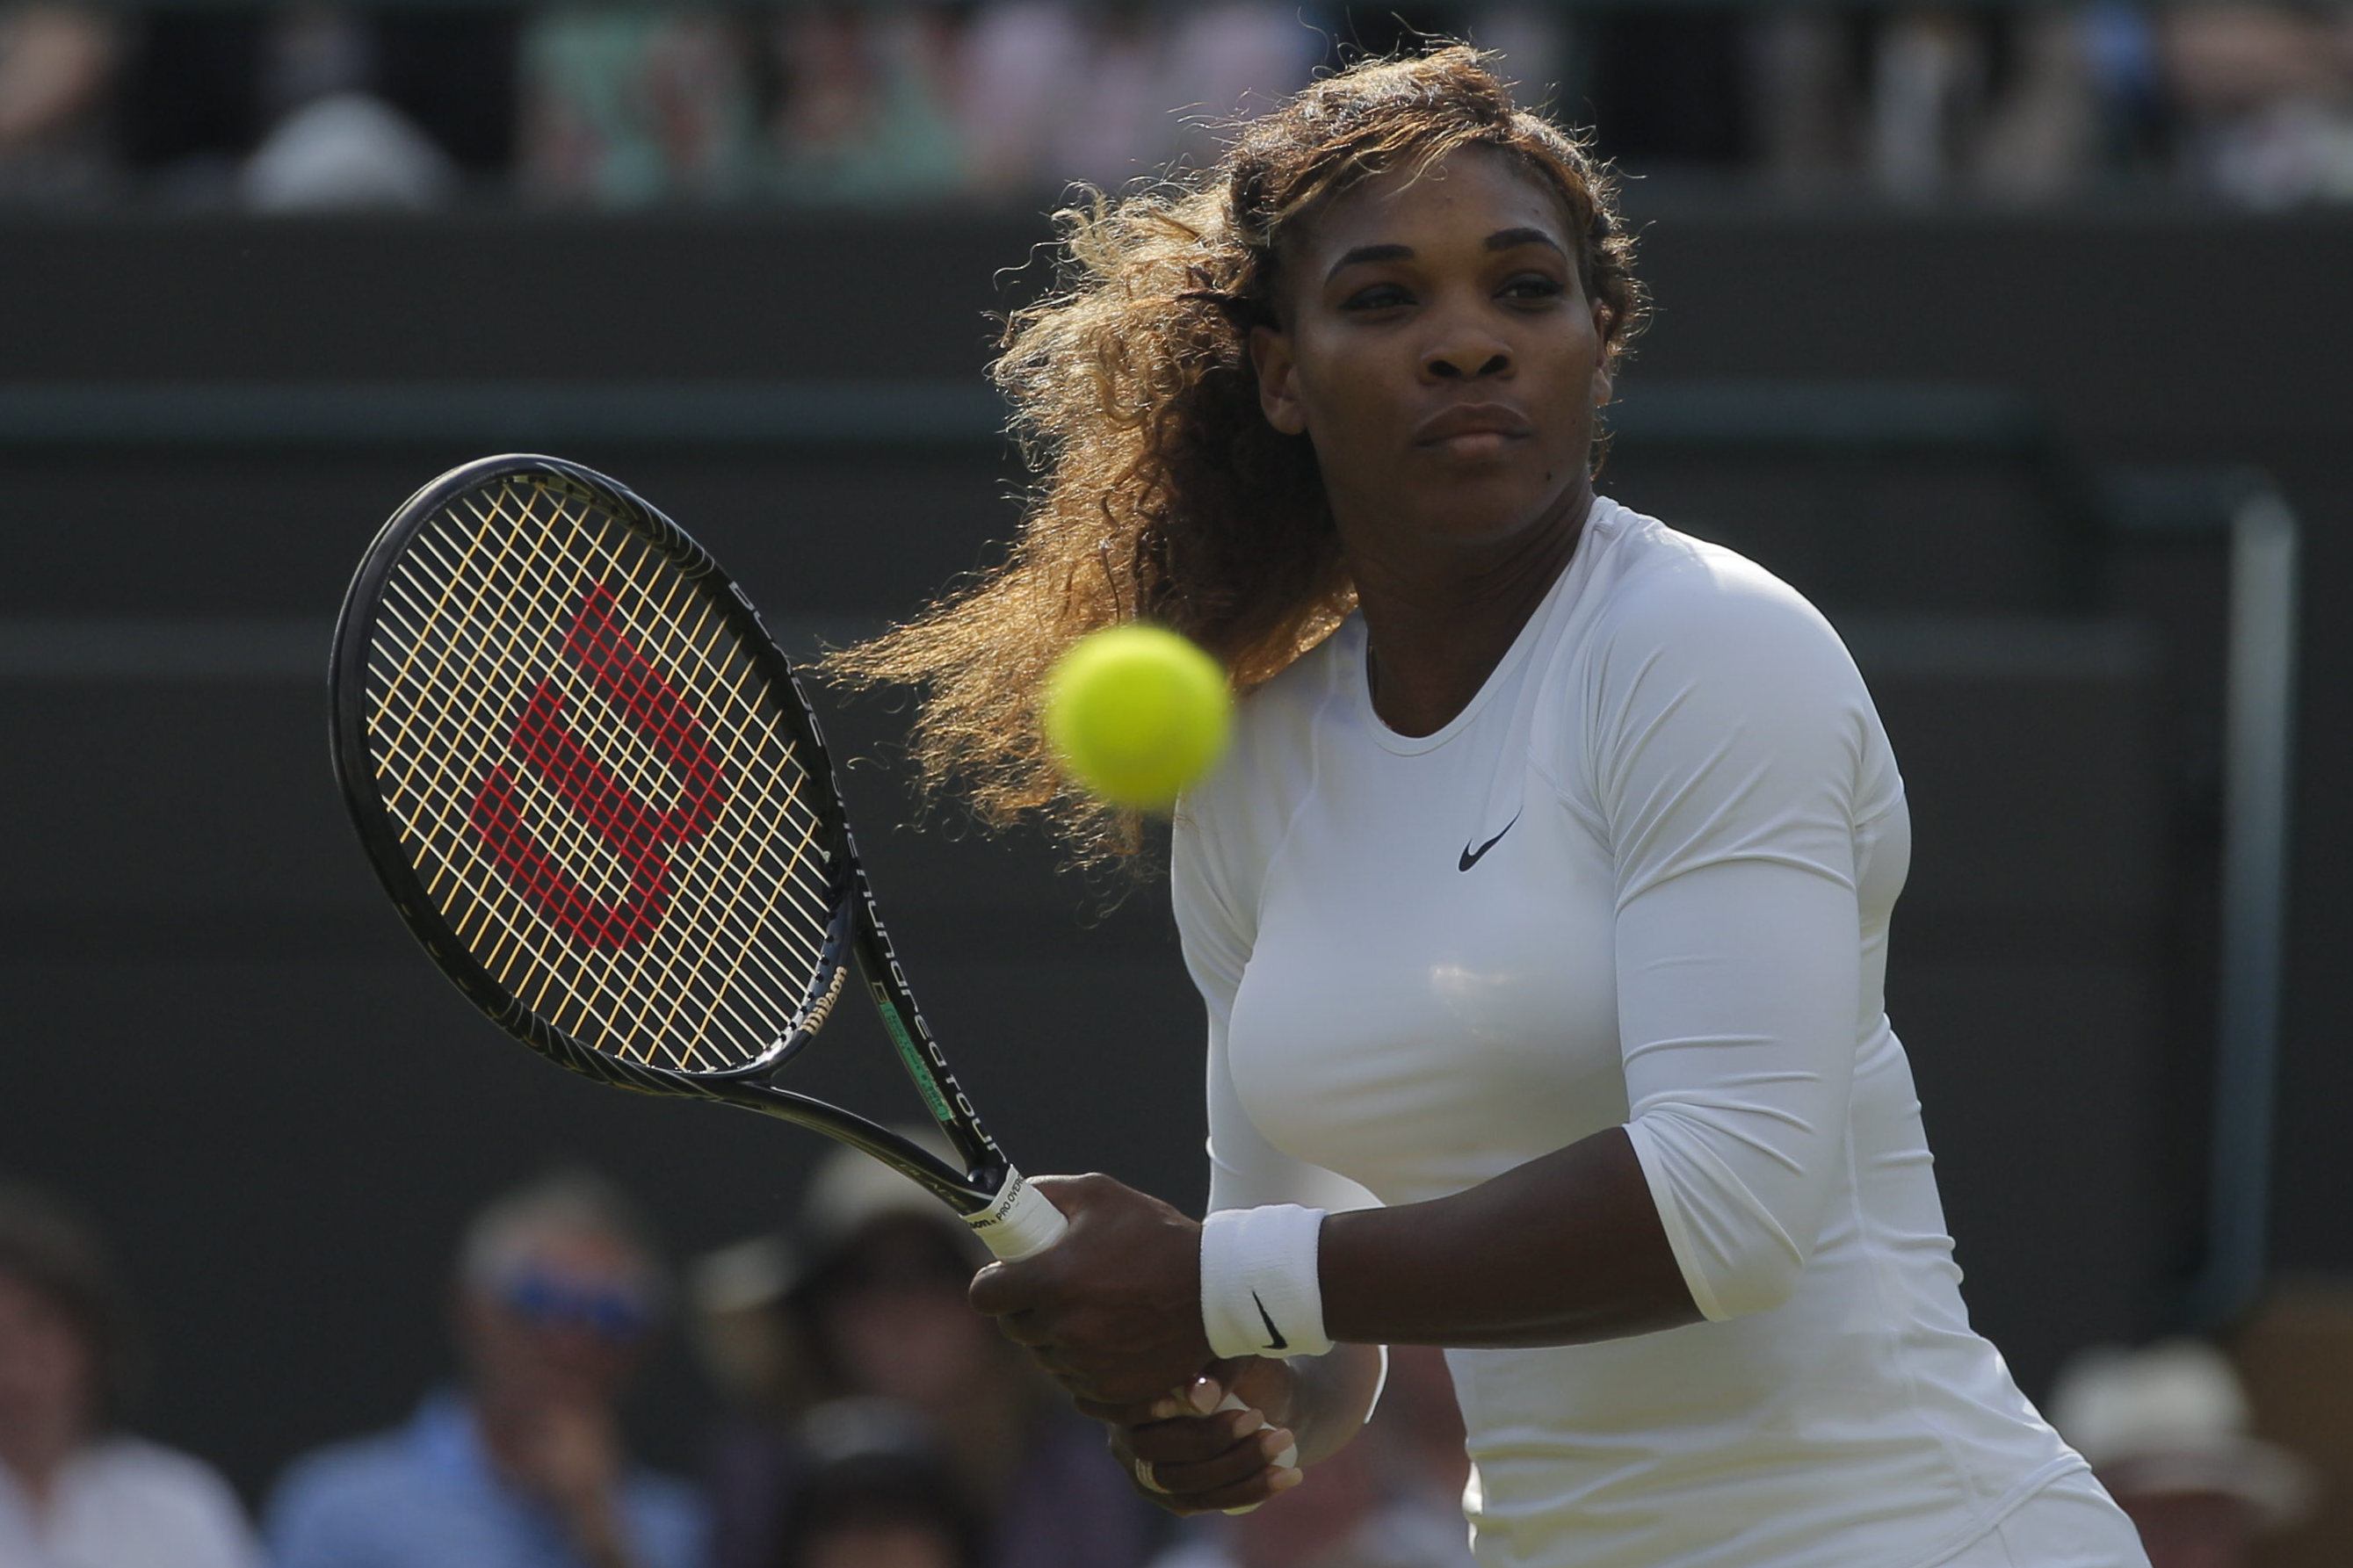 The Once-In-A-Lifetime Serve of Serena Williams